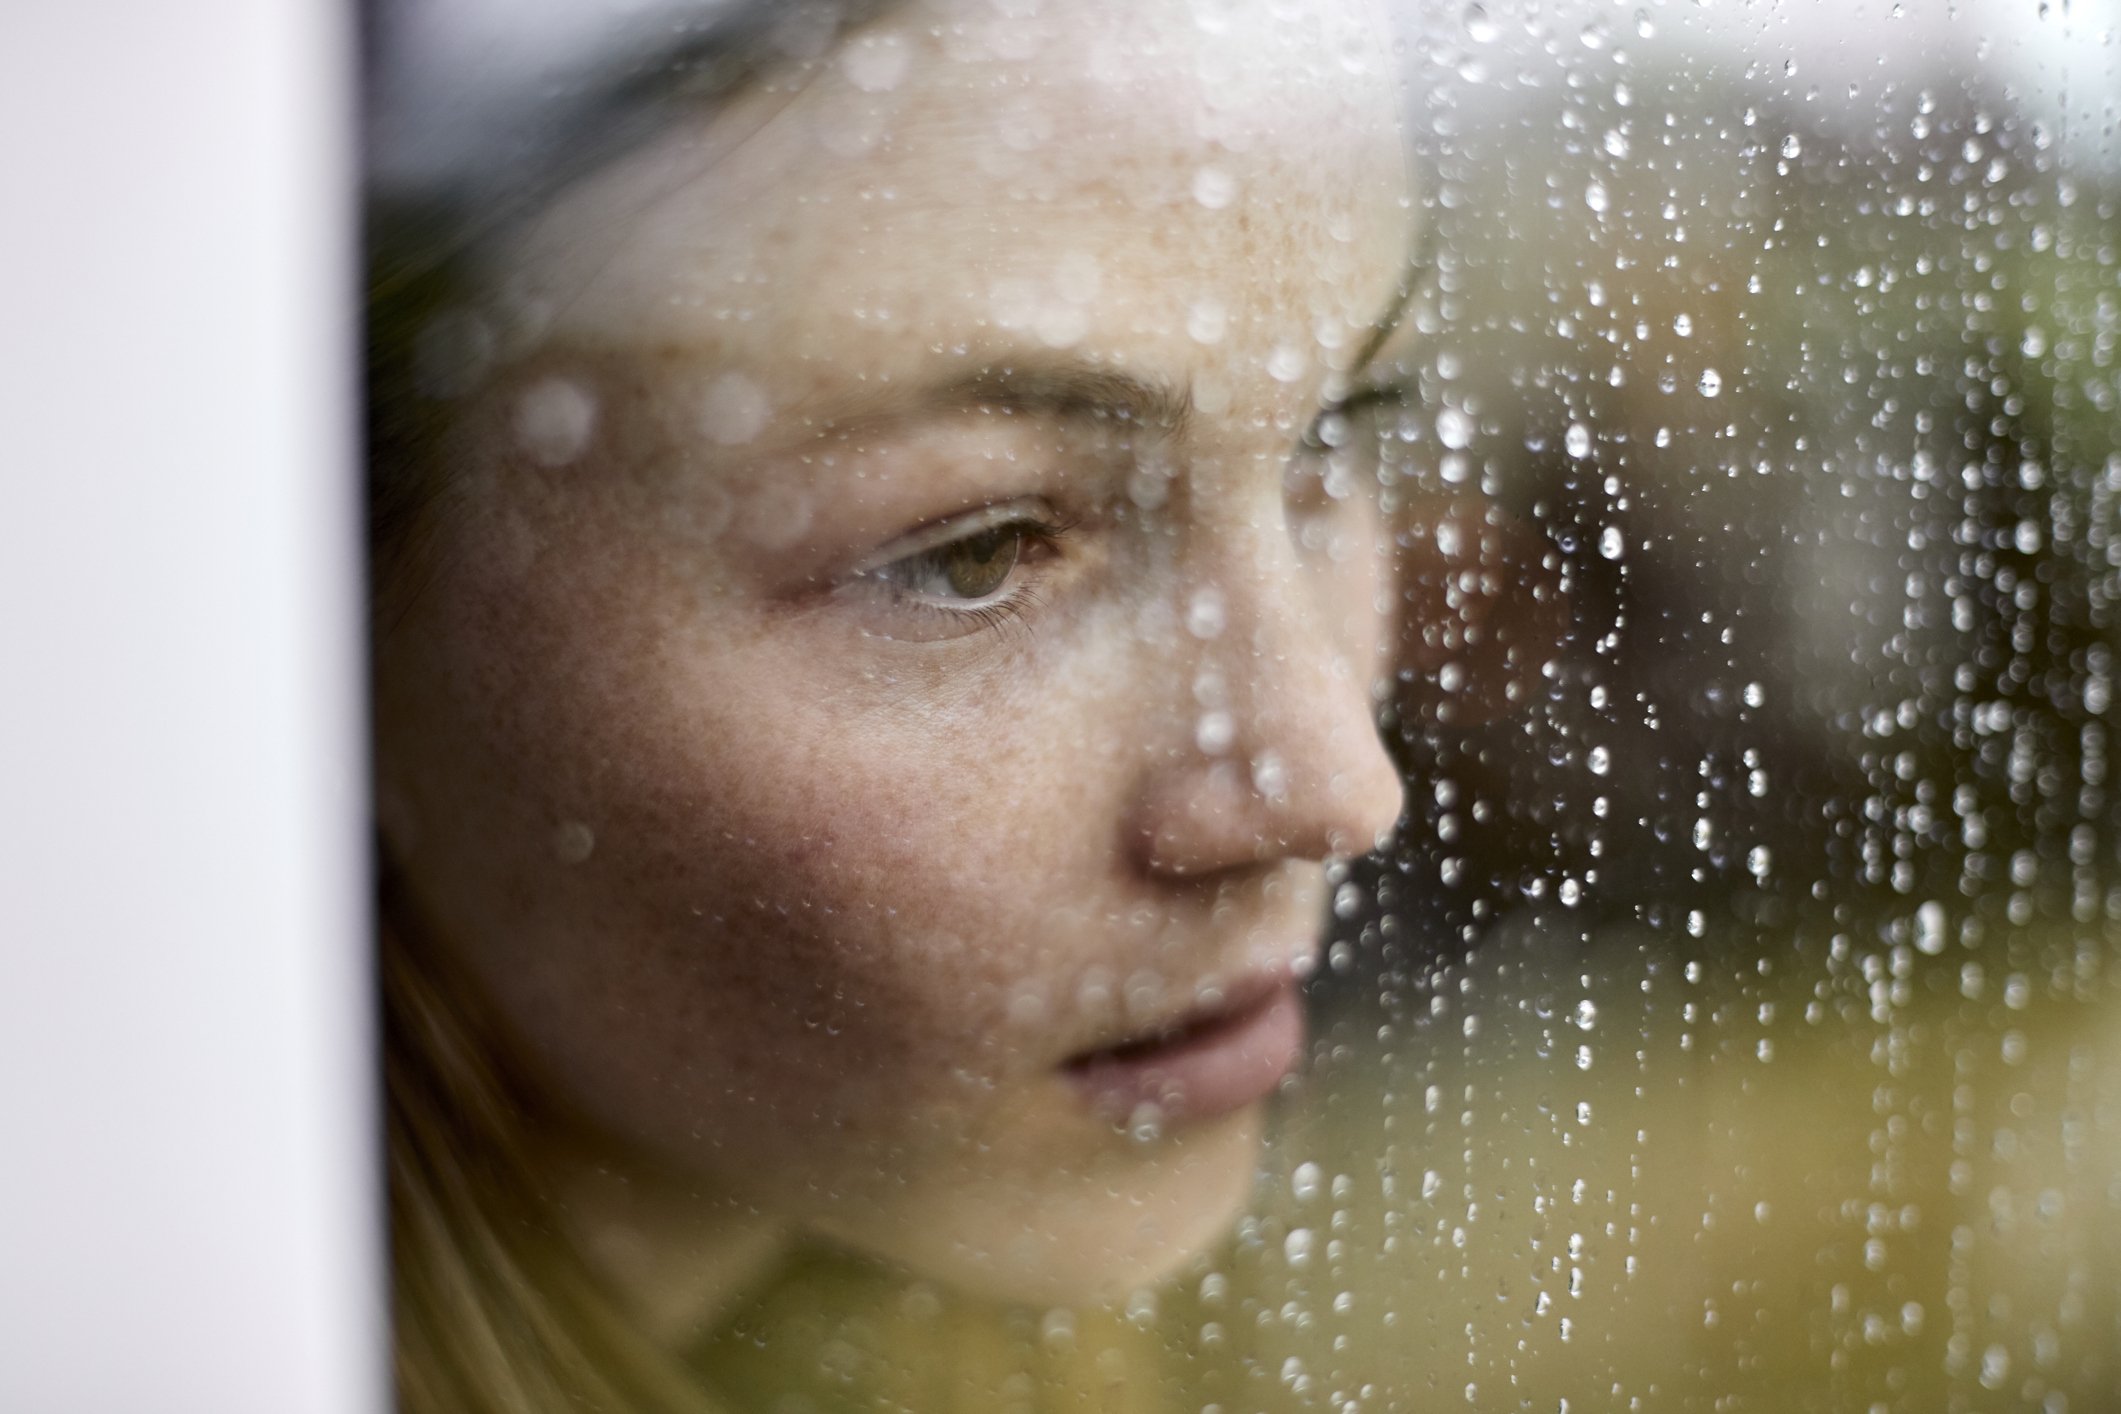 Unhappy young lady looking out the window. | Photo: Getty Images